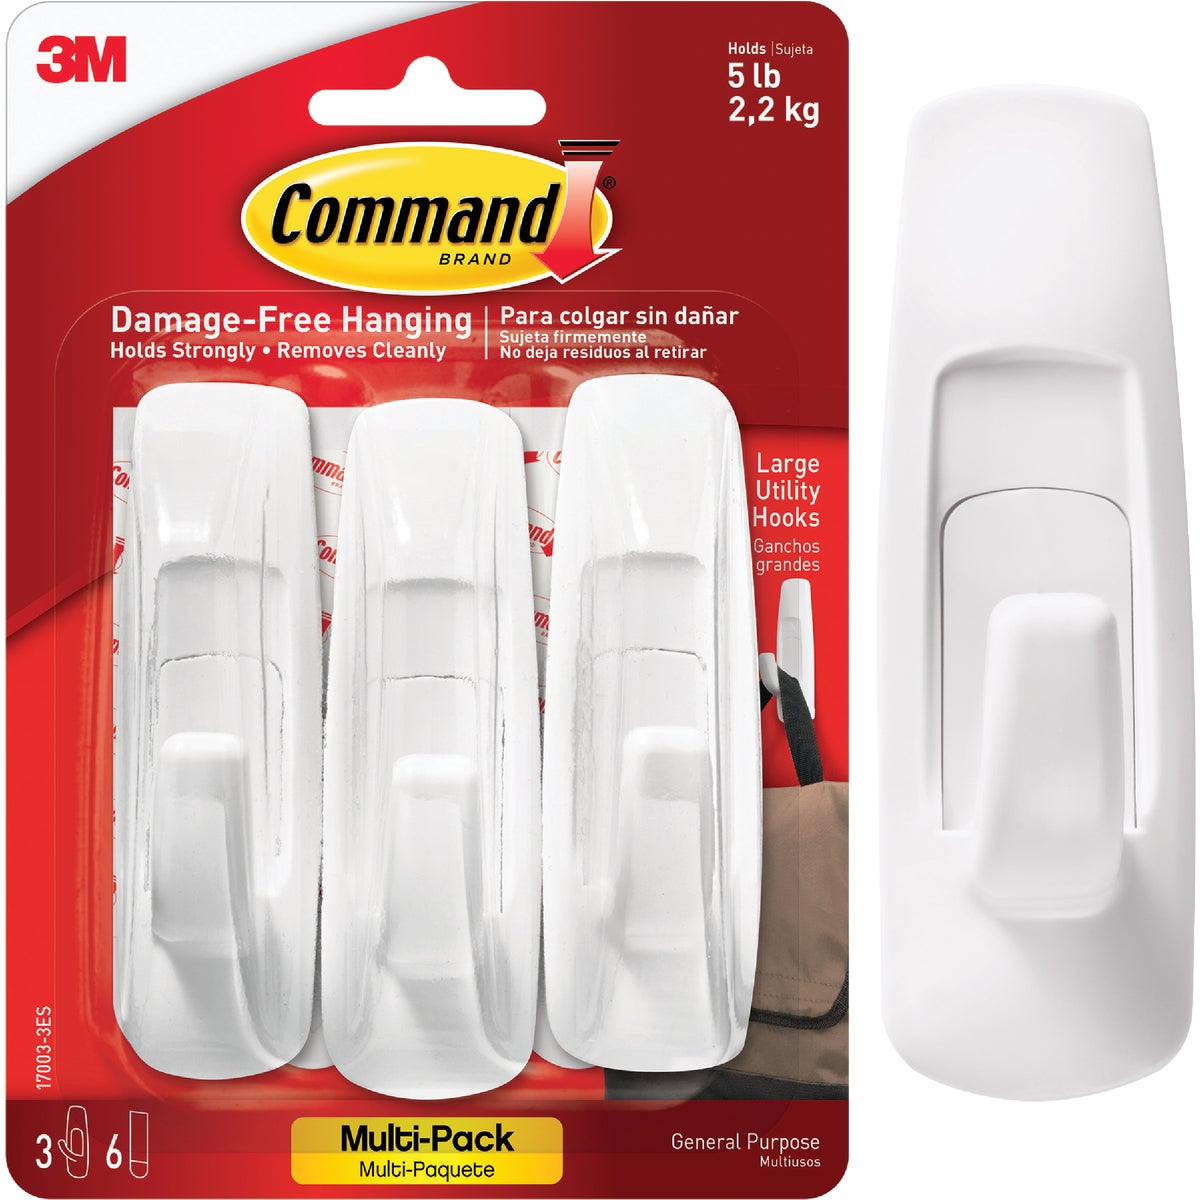 3M Command Large Utility Adhesive Hook (3-Pack)